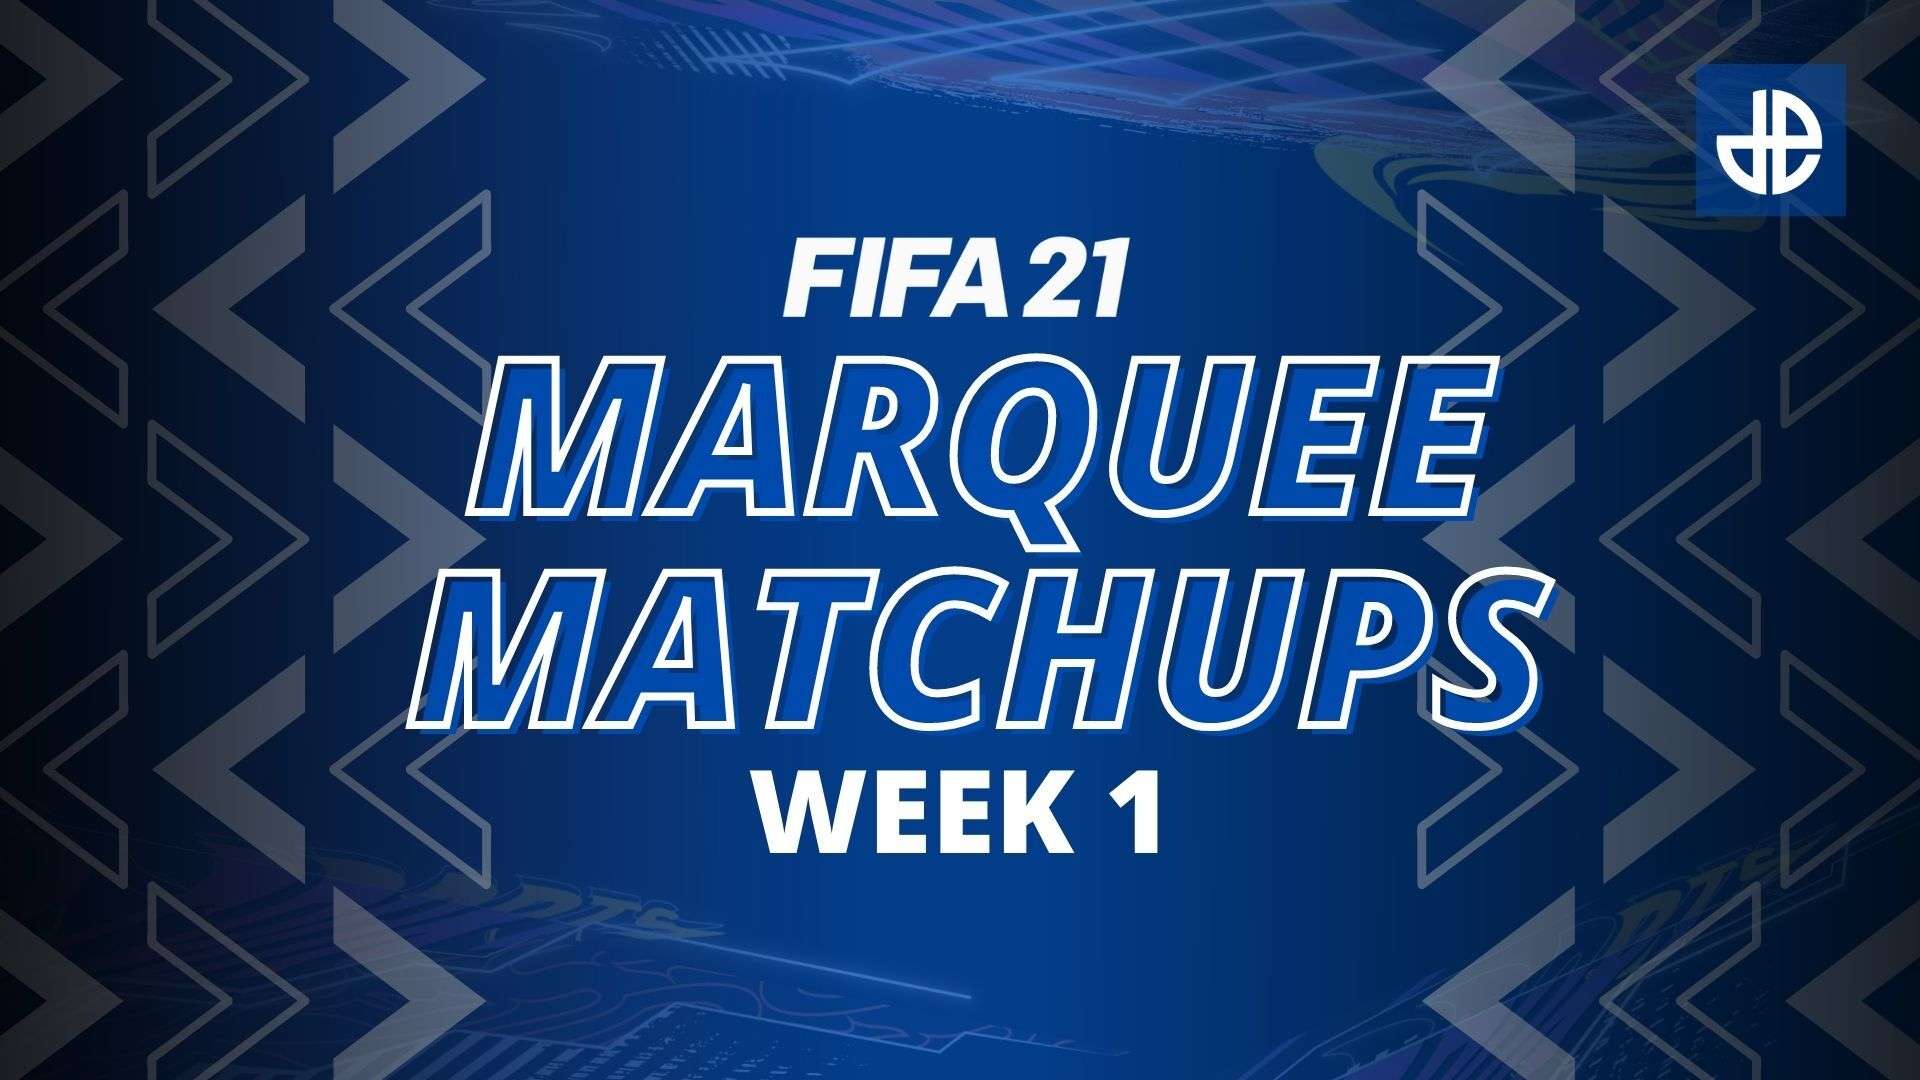 Marquee Matchups in FIFA 21